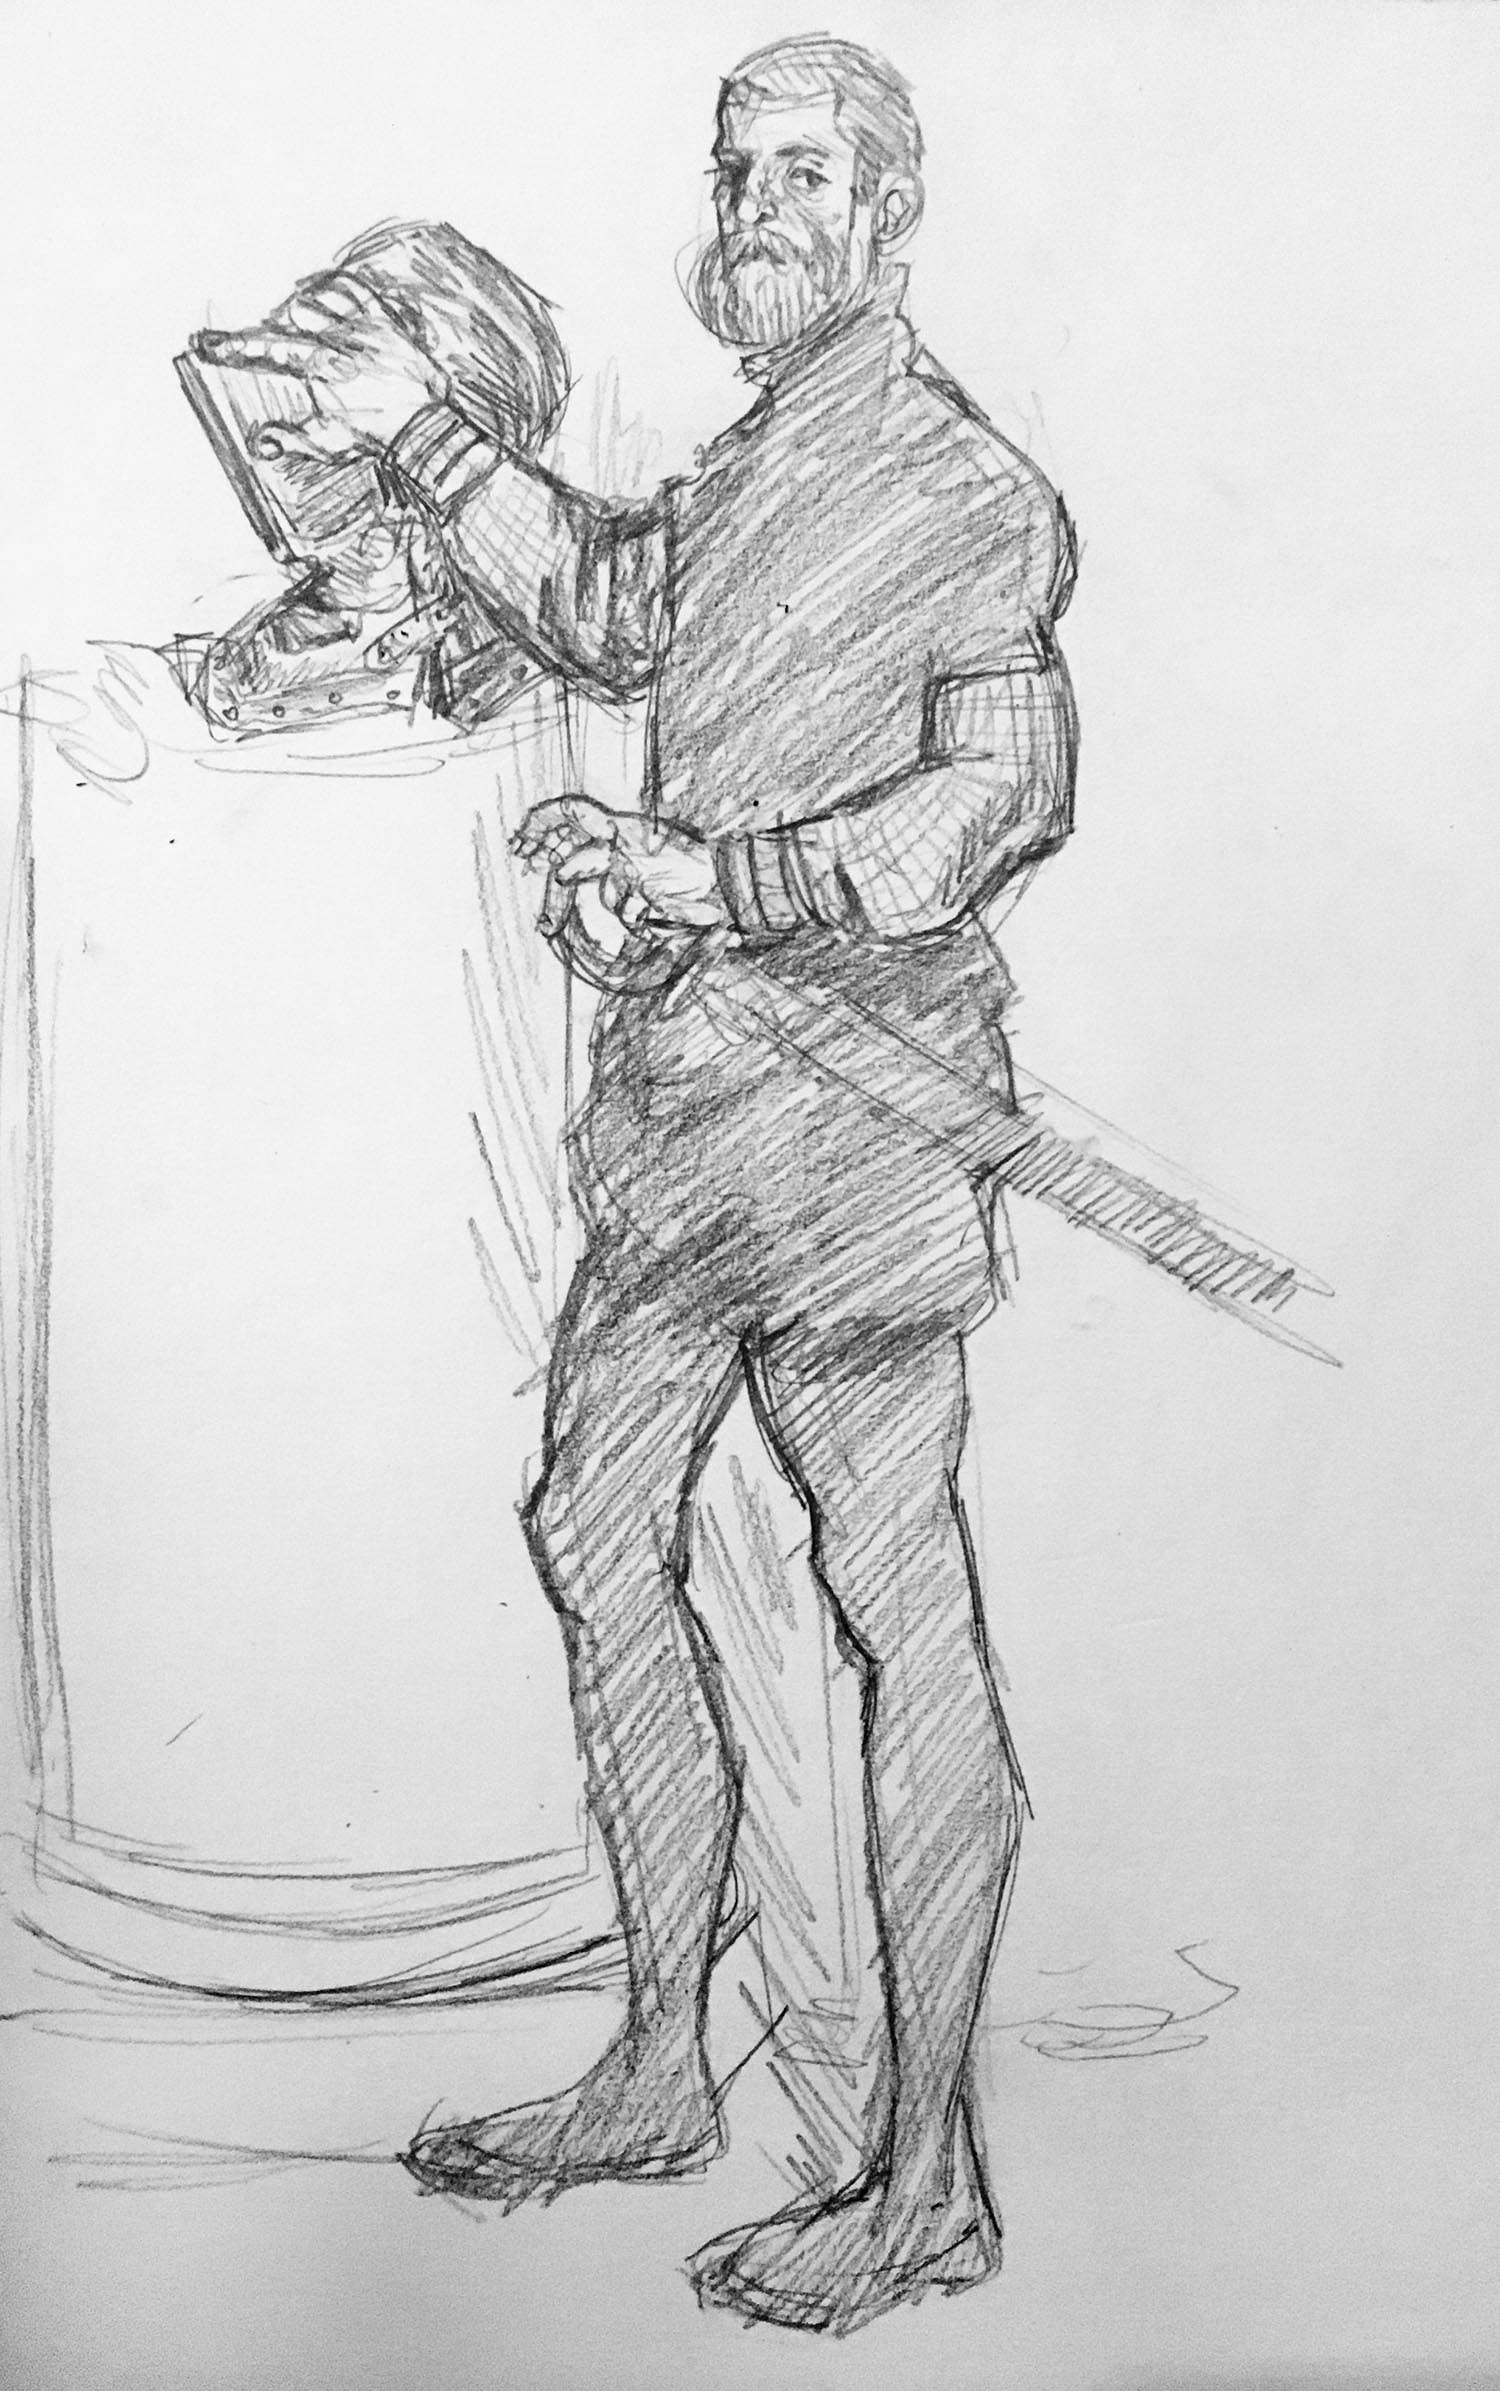 pencil sketch of knight posing with helmet and sword